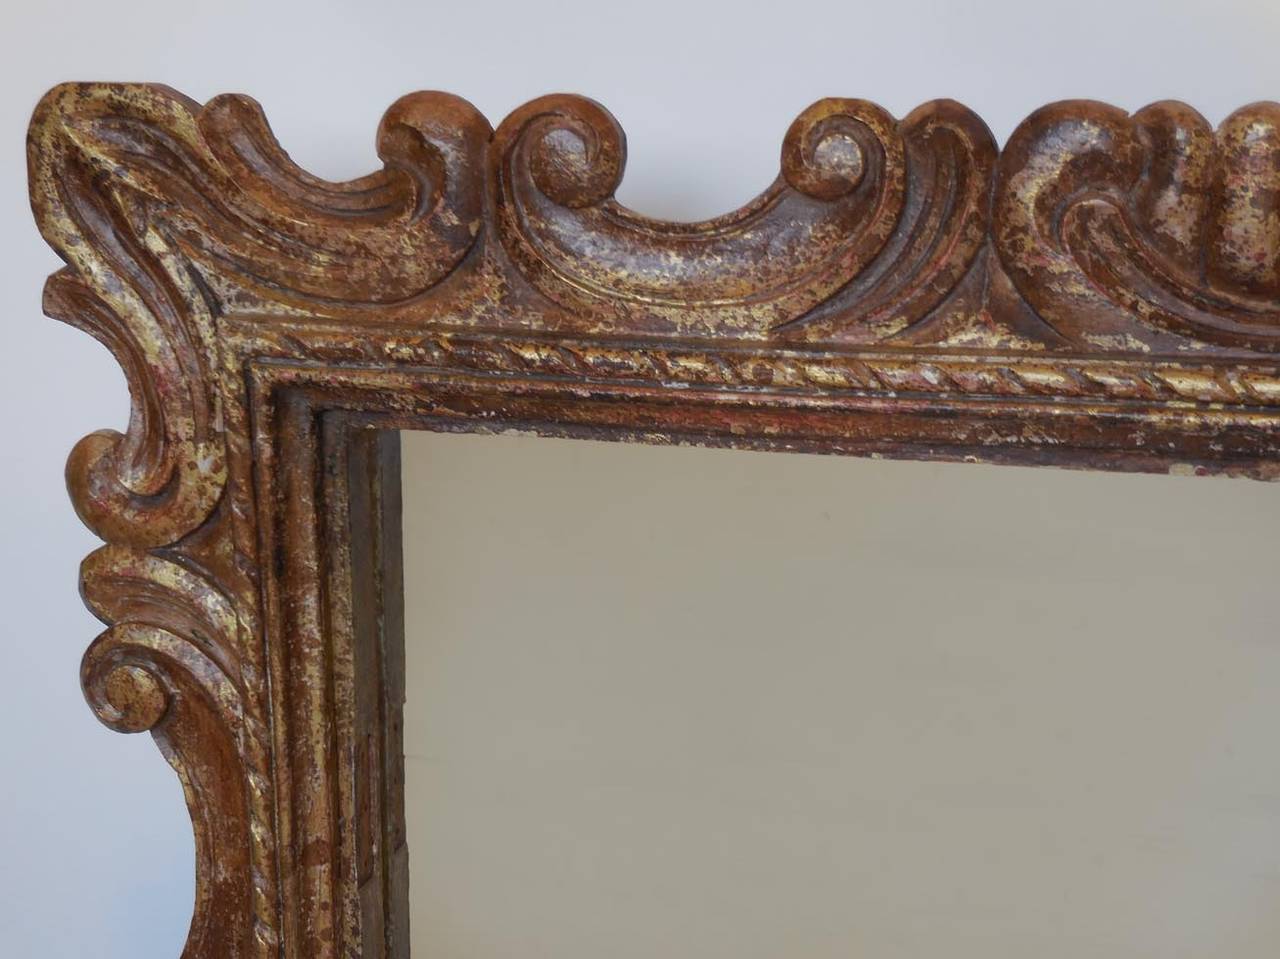 Hand-carved hardwood frame around clear mirror glass. Gesso and hand-painted in variations of gold tones.